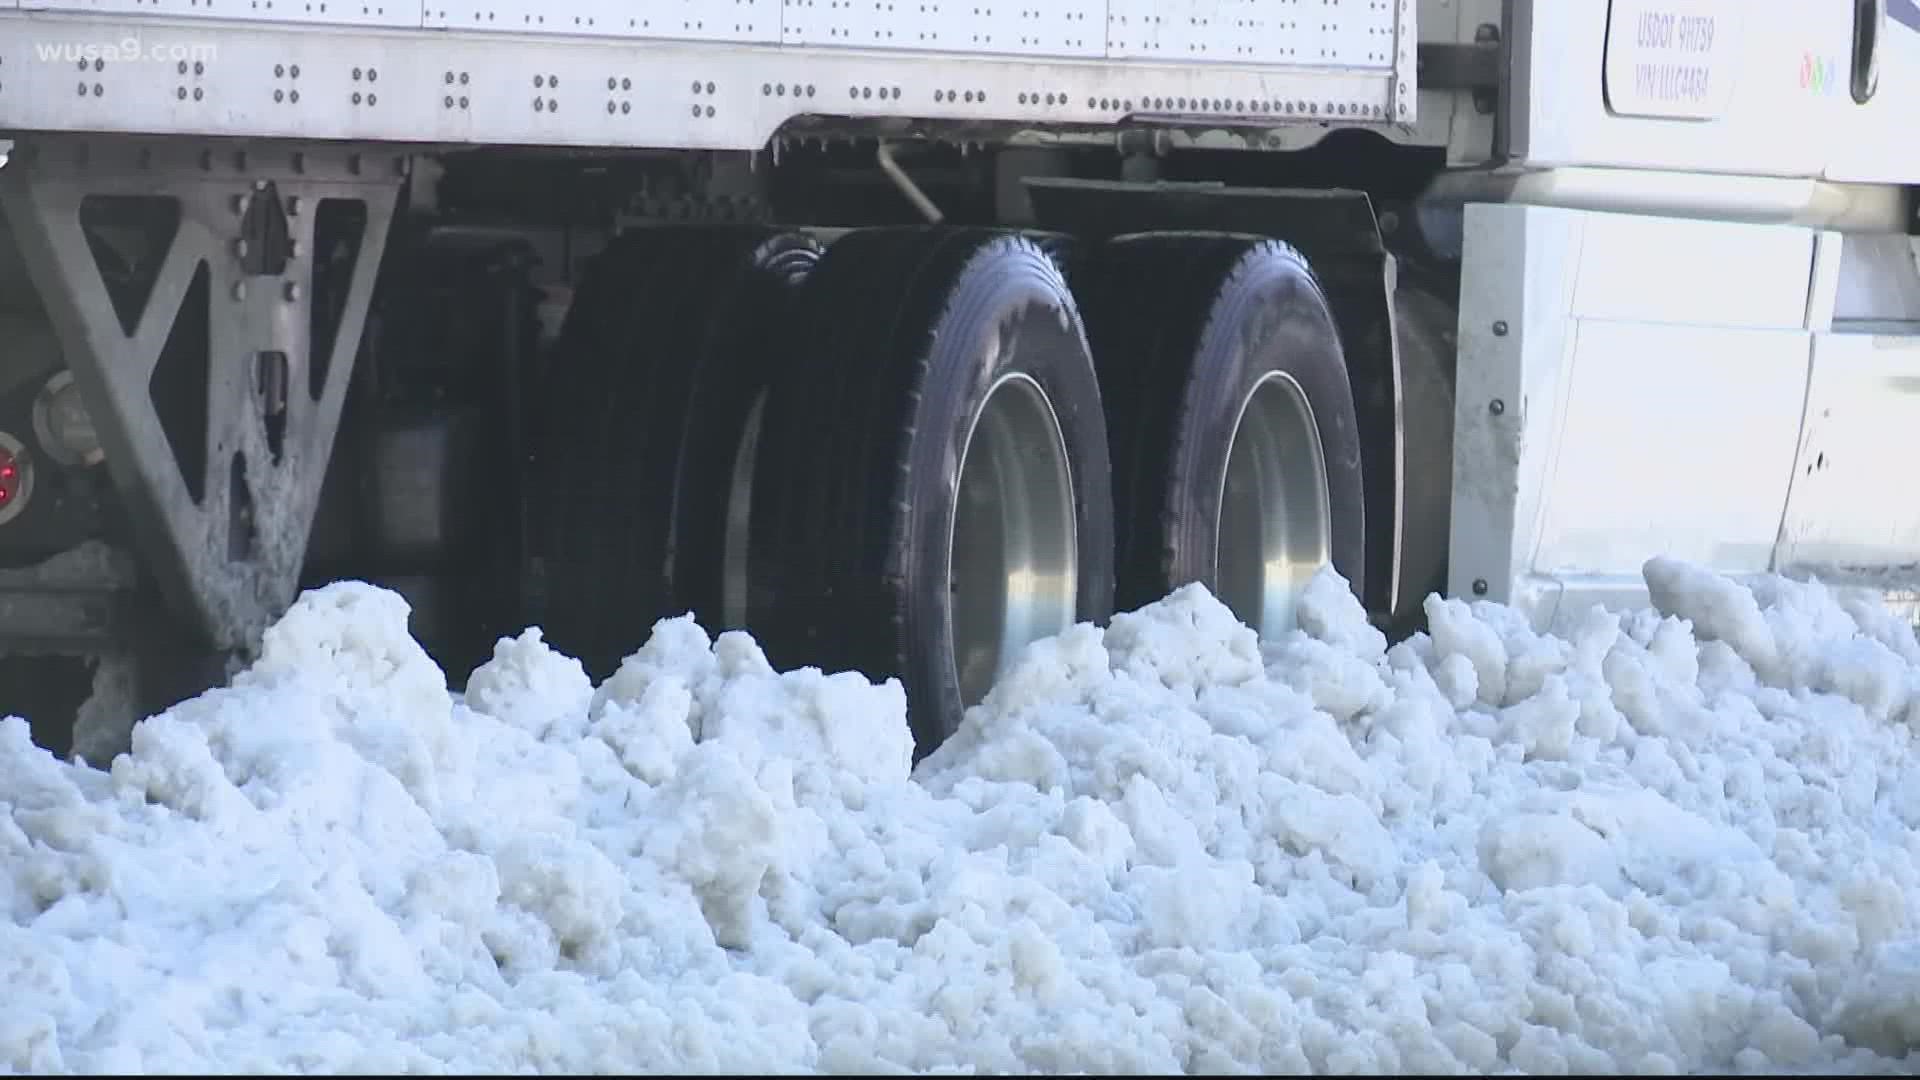 The Virginia National Guard is on standby for the second round of snow as part of the state's effort to be prepared.